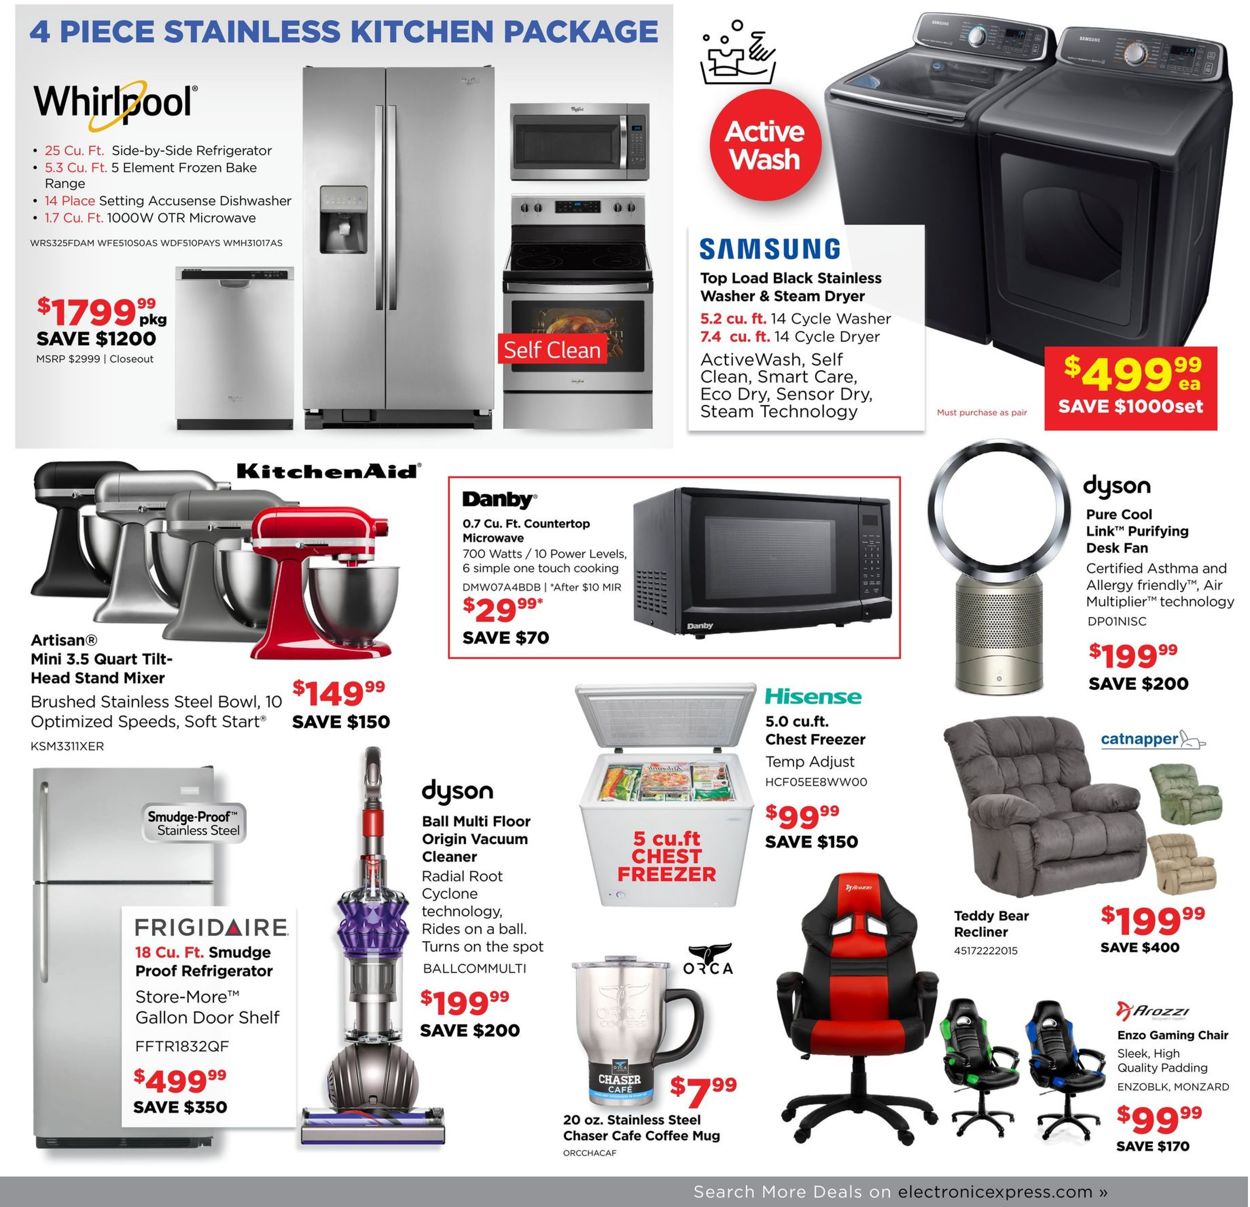 Electronic Express - Thanksgiving Ad 2019 Weekly Ad Circular - valid 11/28-11/30/2019 (Page 3)